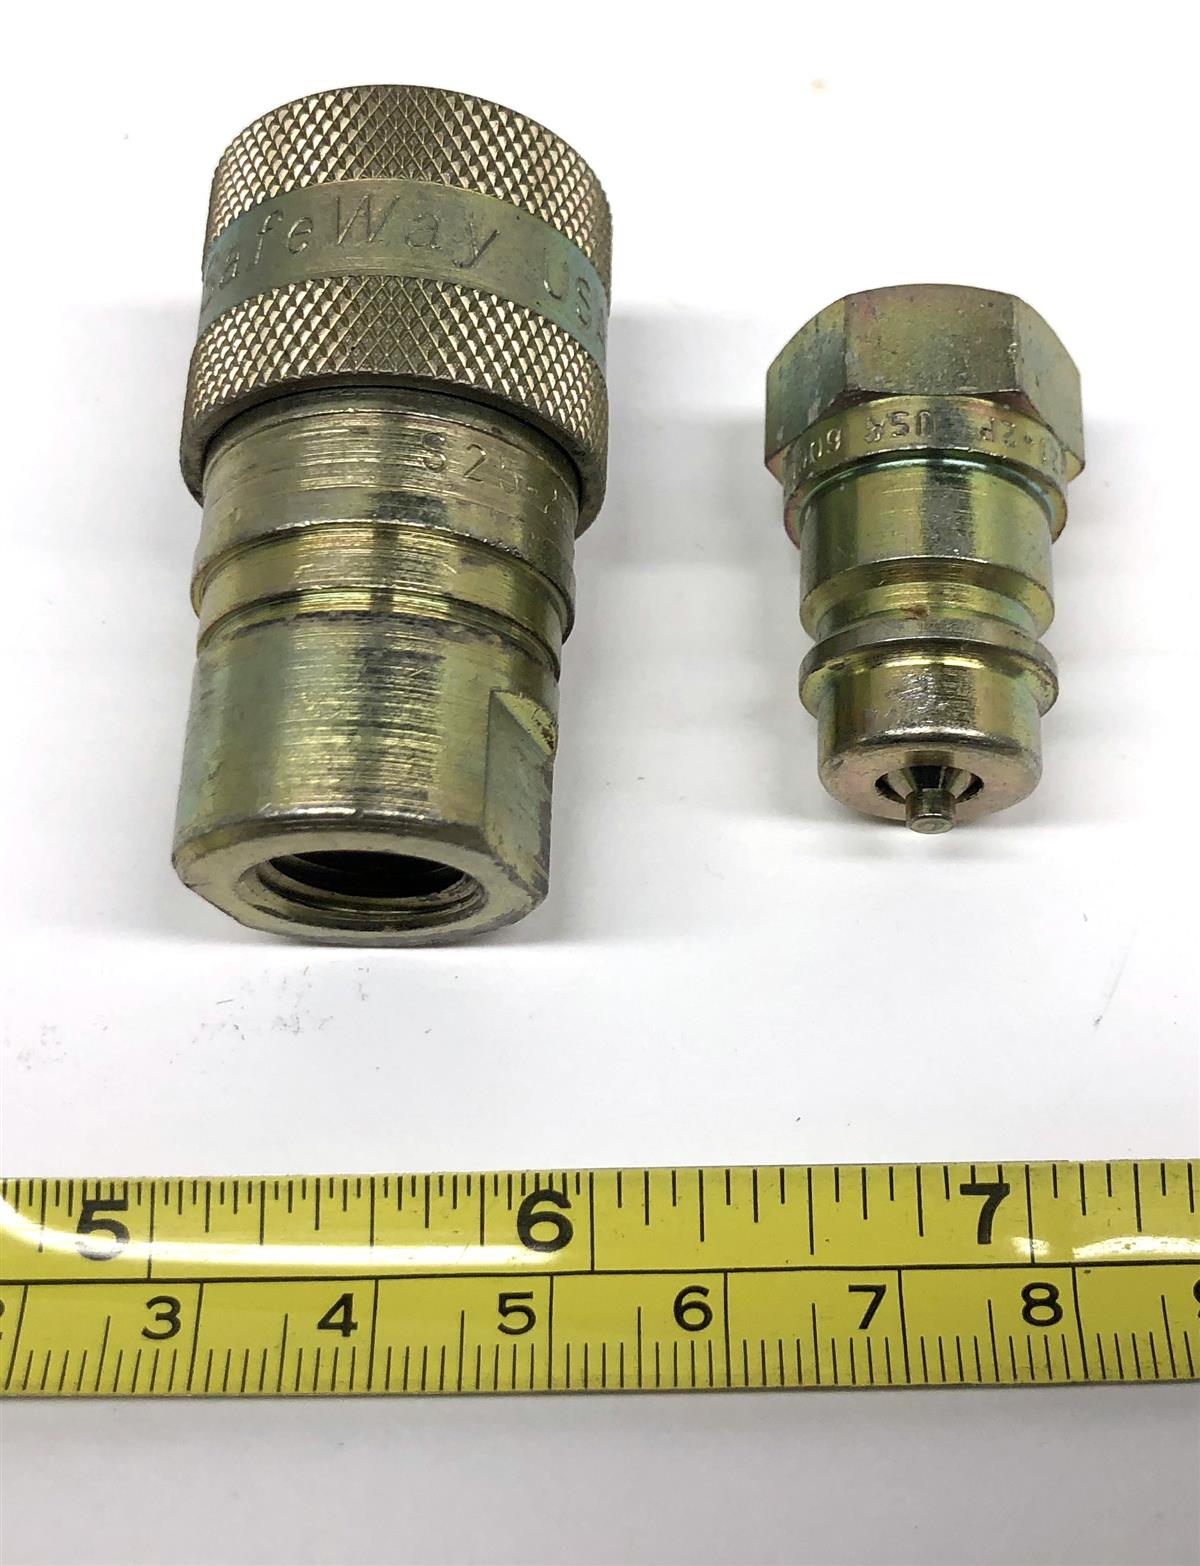 ALL-5332 | ALL-5332 Quick Disconnect Coupling Assembly (3).JPG